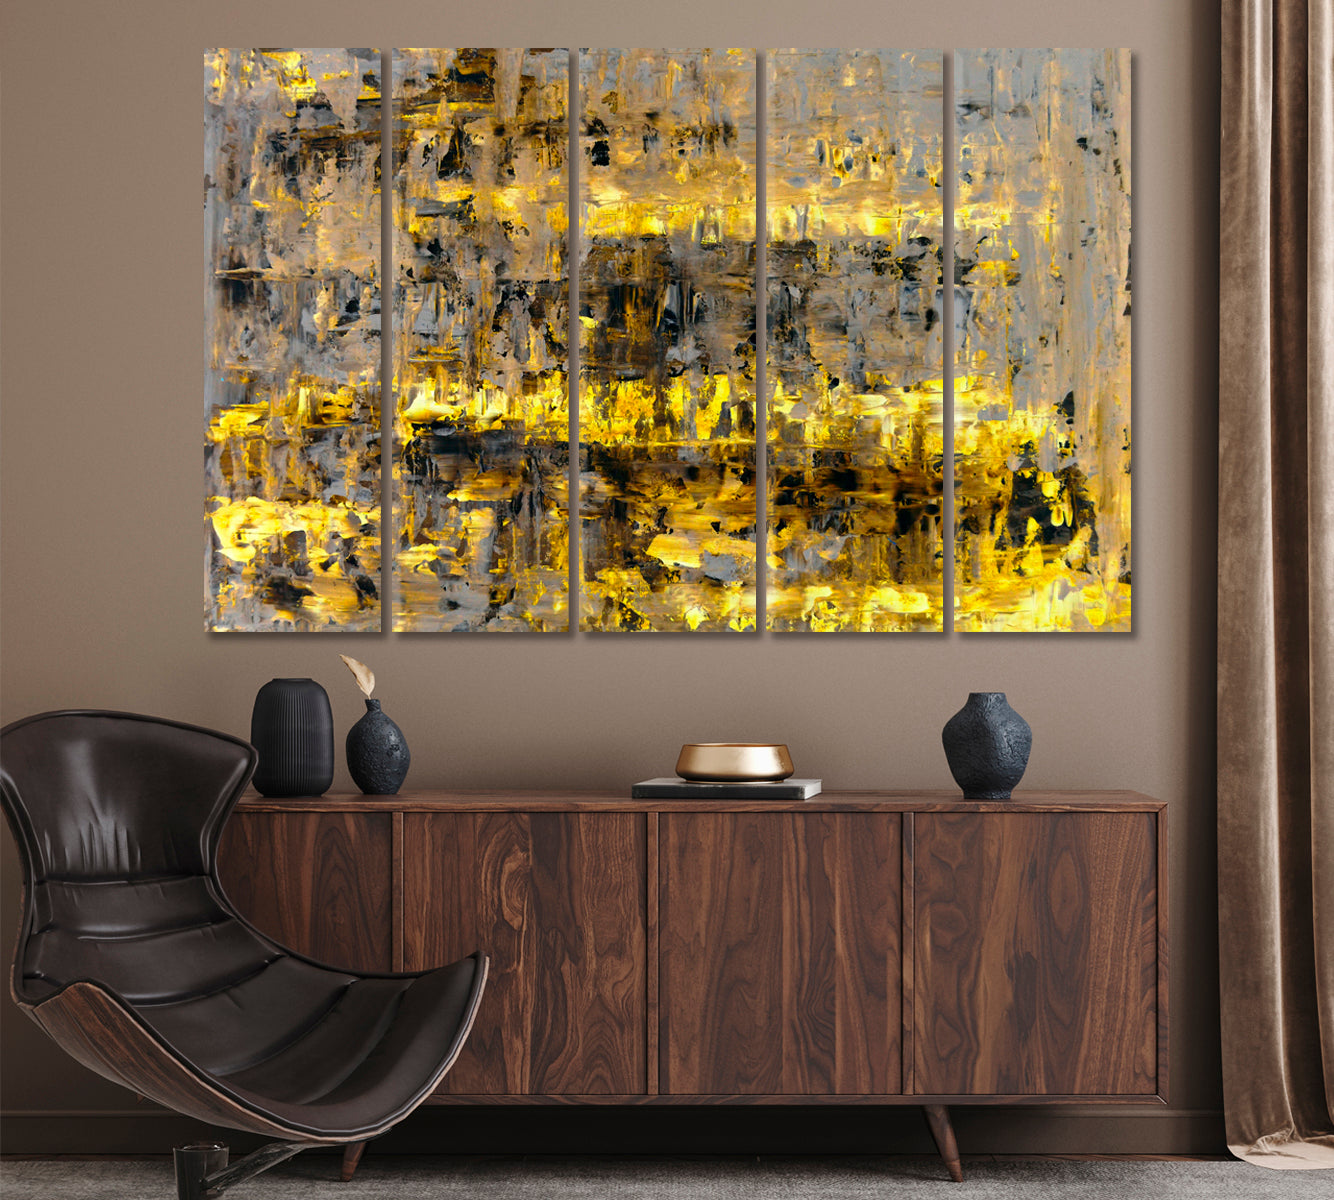 Bright Yellow Abstract Landscape Canvas Print ArtLexy 5 Panels 36"x24" inches 